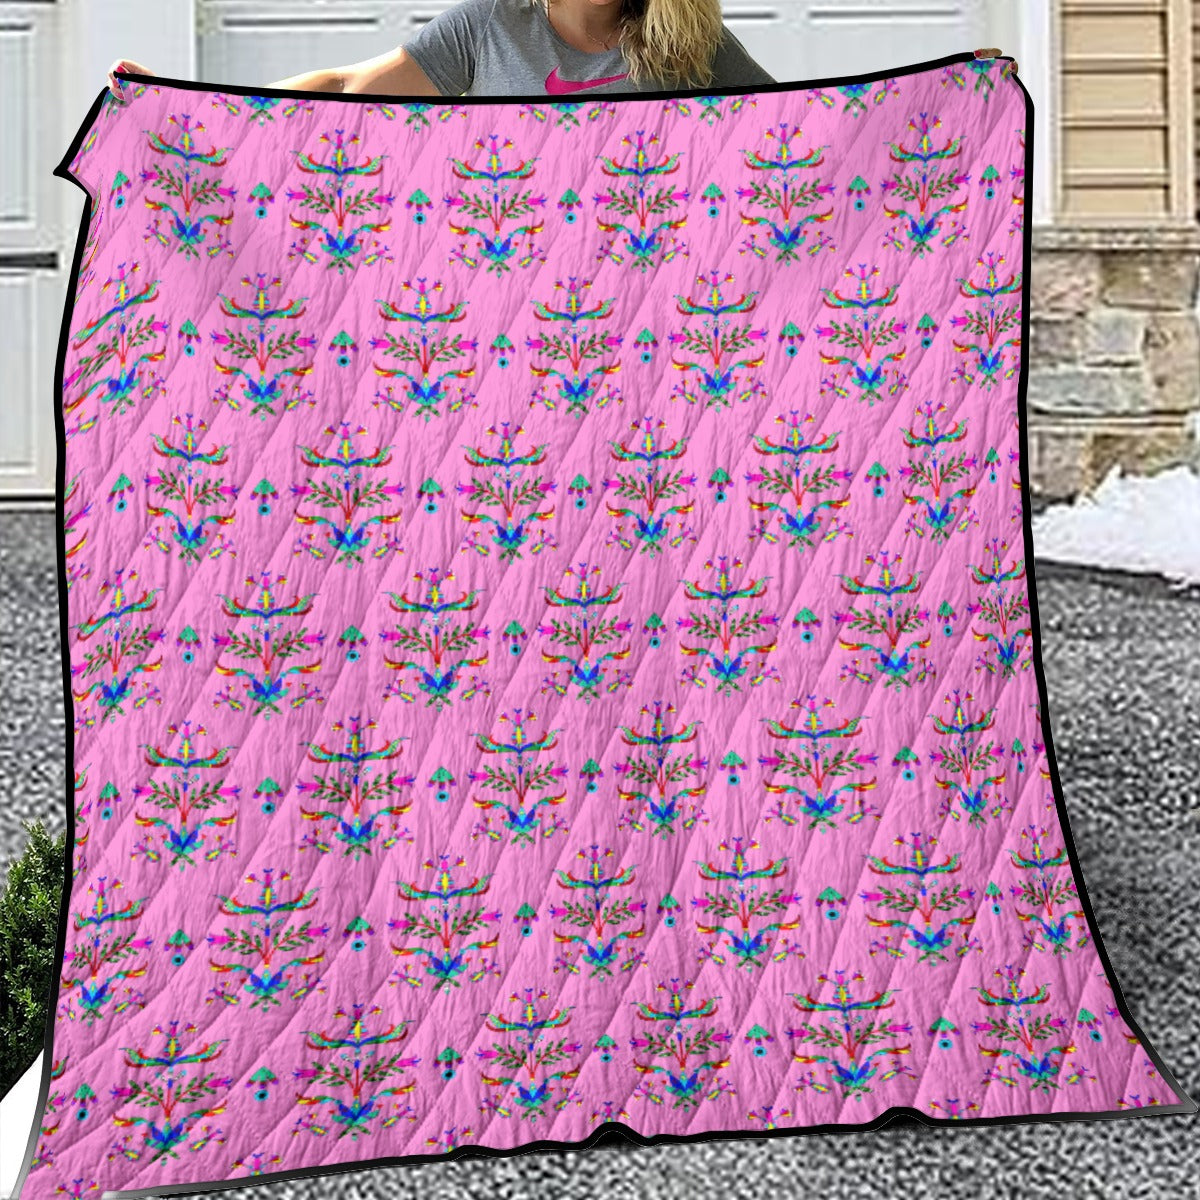 Dakota Damask Cheyenne Pink Lightweight & Breathable Quilt With Edge-wrapping Strips